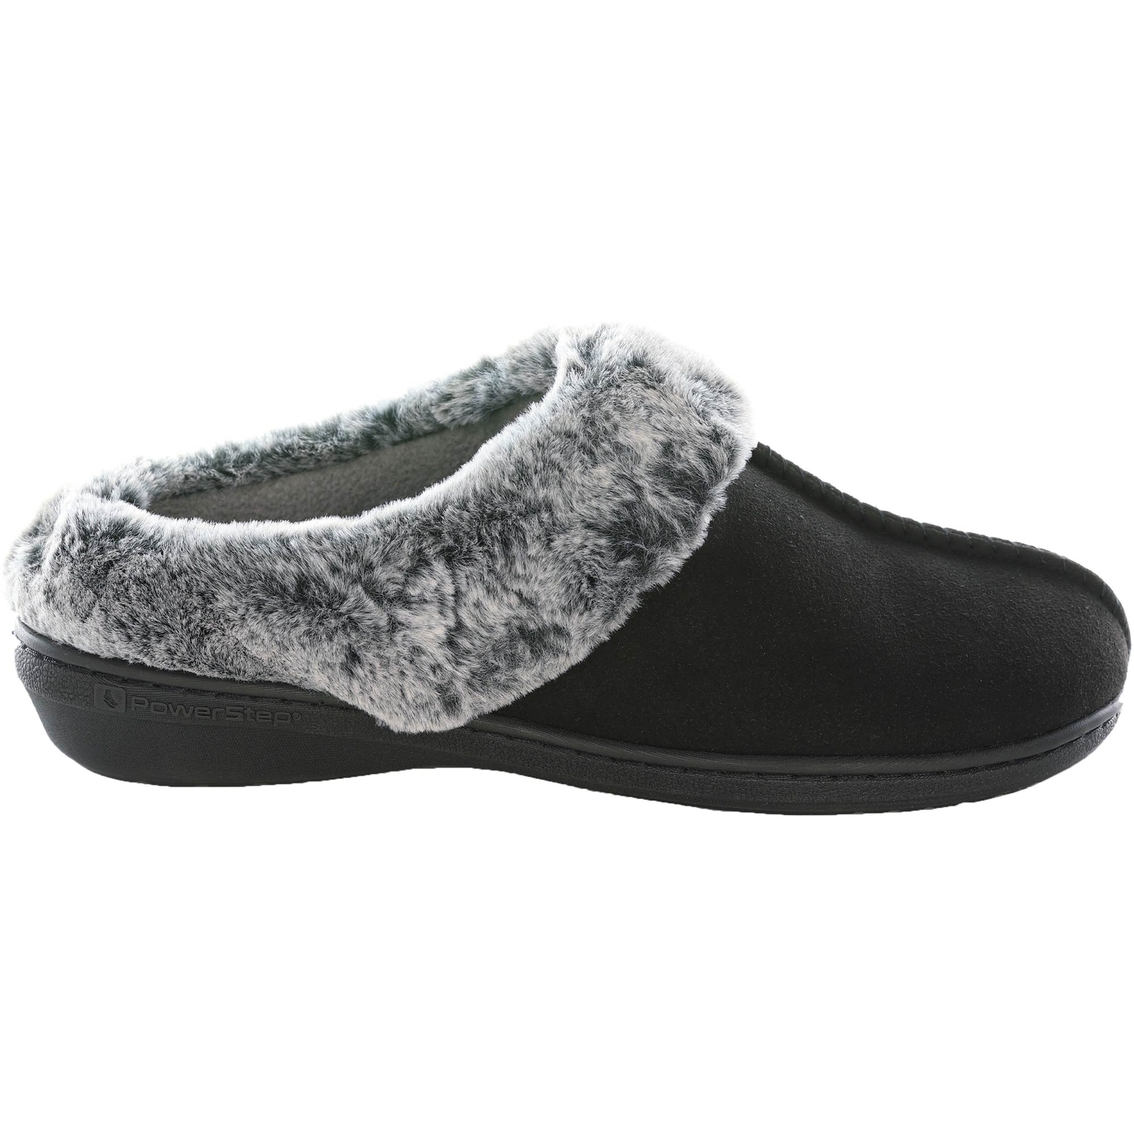 Powerstep Women's Clog Slippers - Image 2 of 7